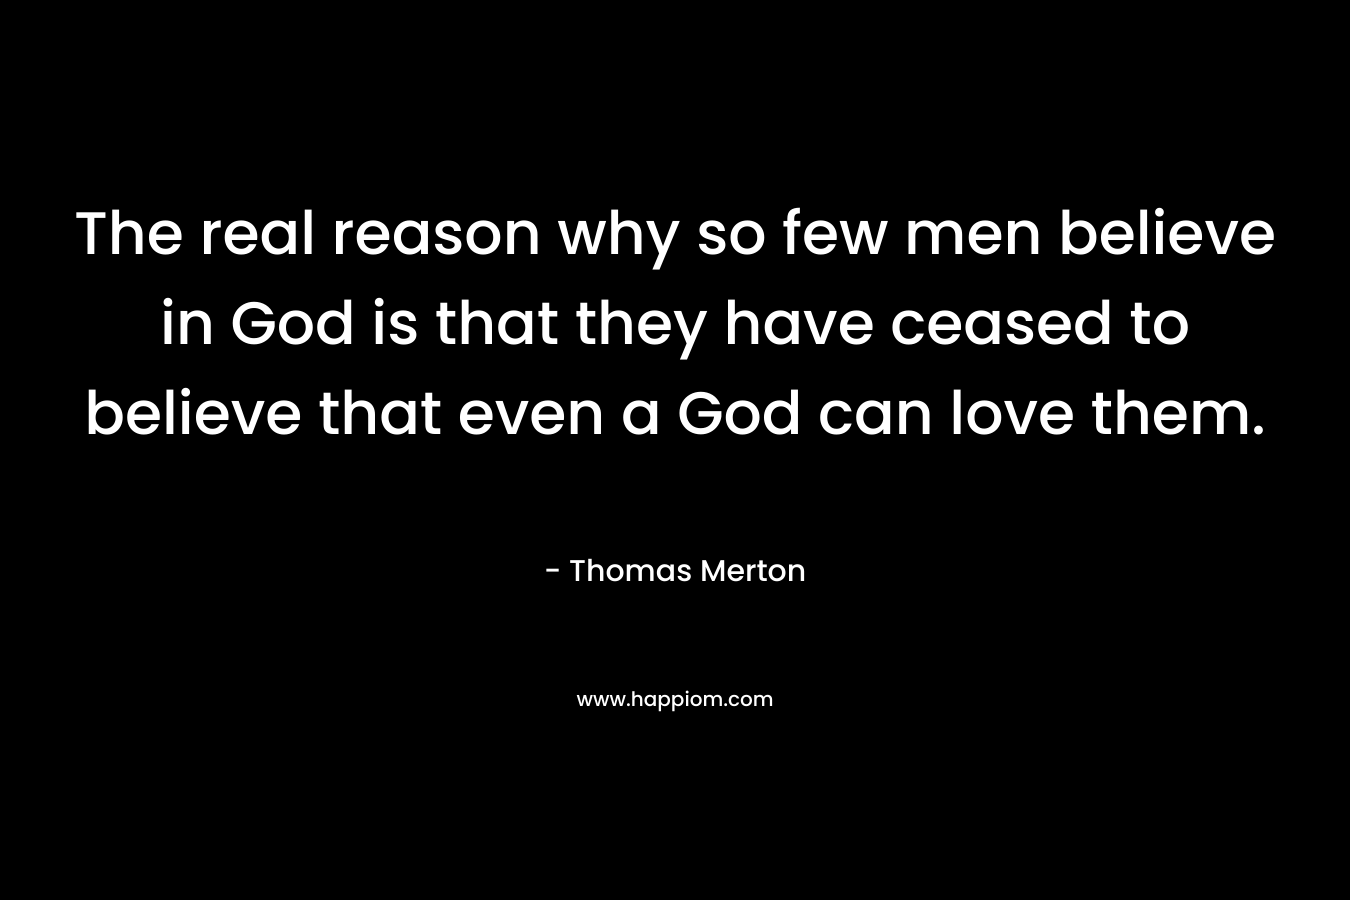 The real reason why so few men believe in God is that they have ceased to believe that even a God can love them. – Thomas Merton